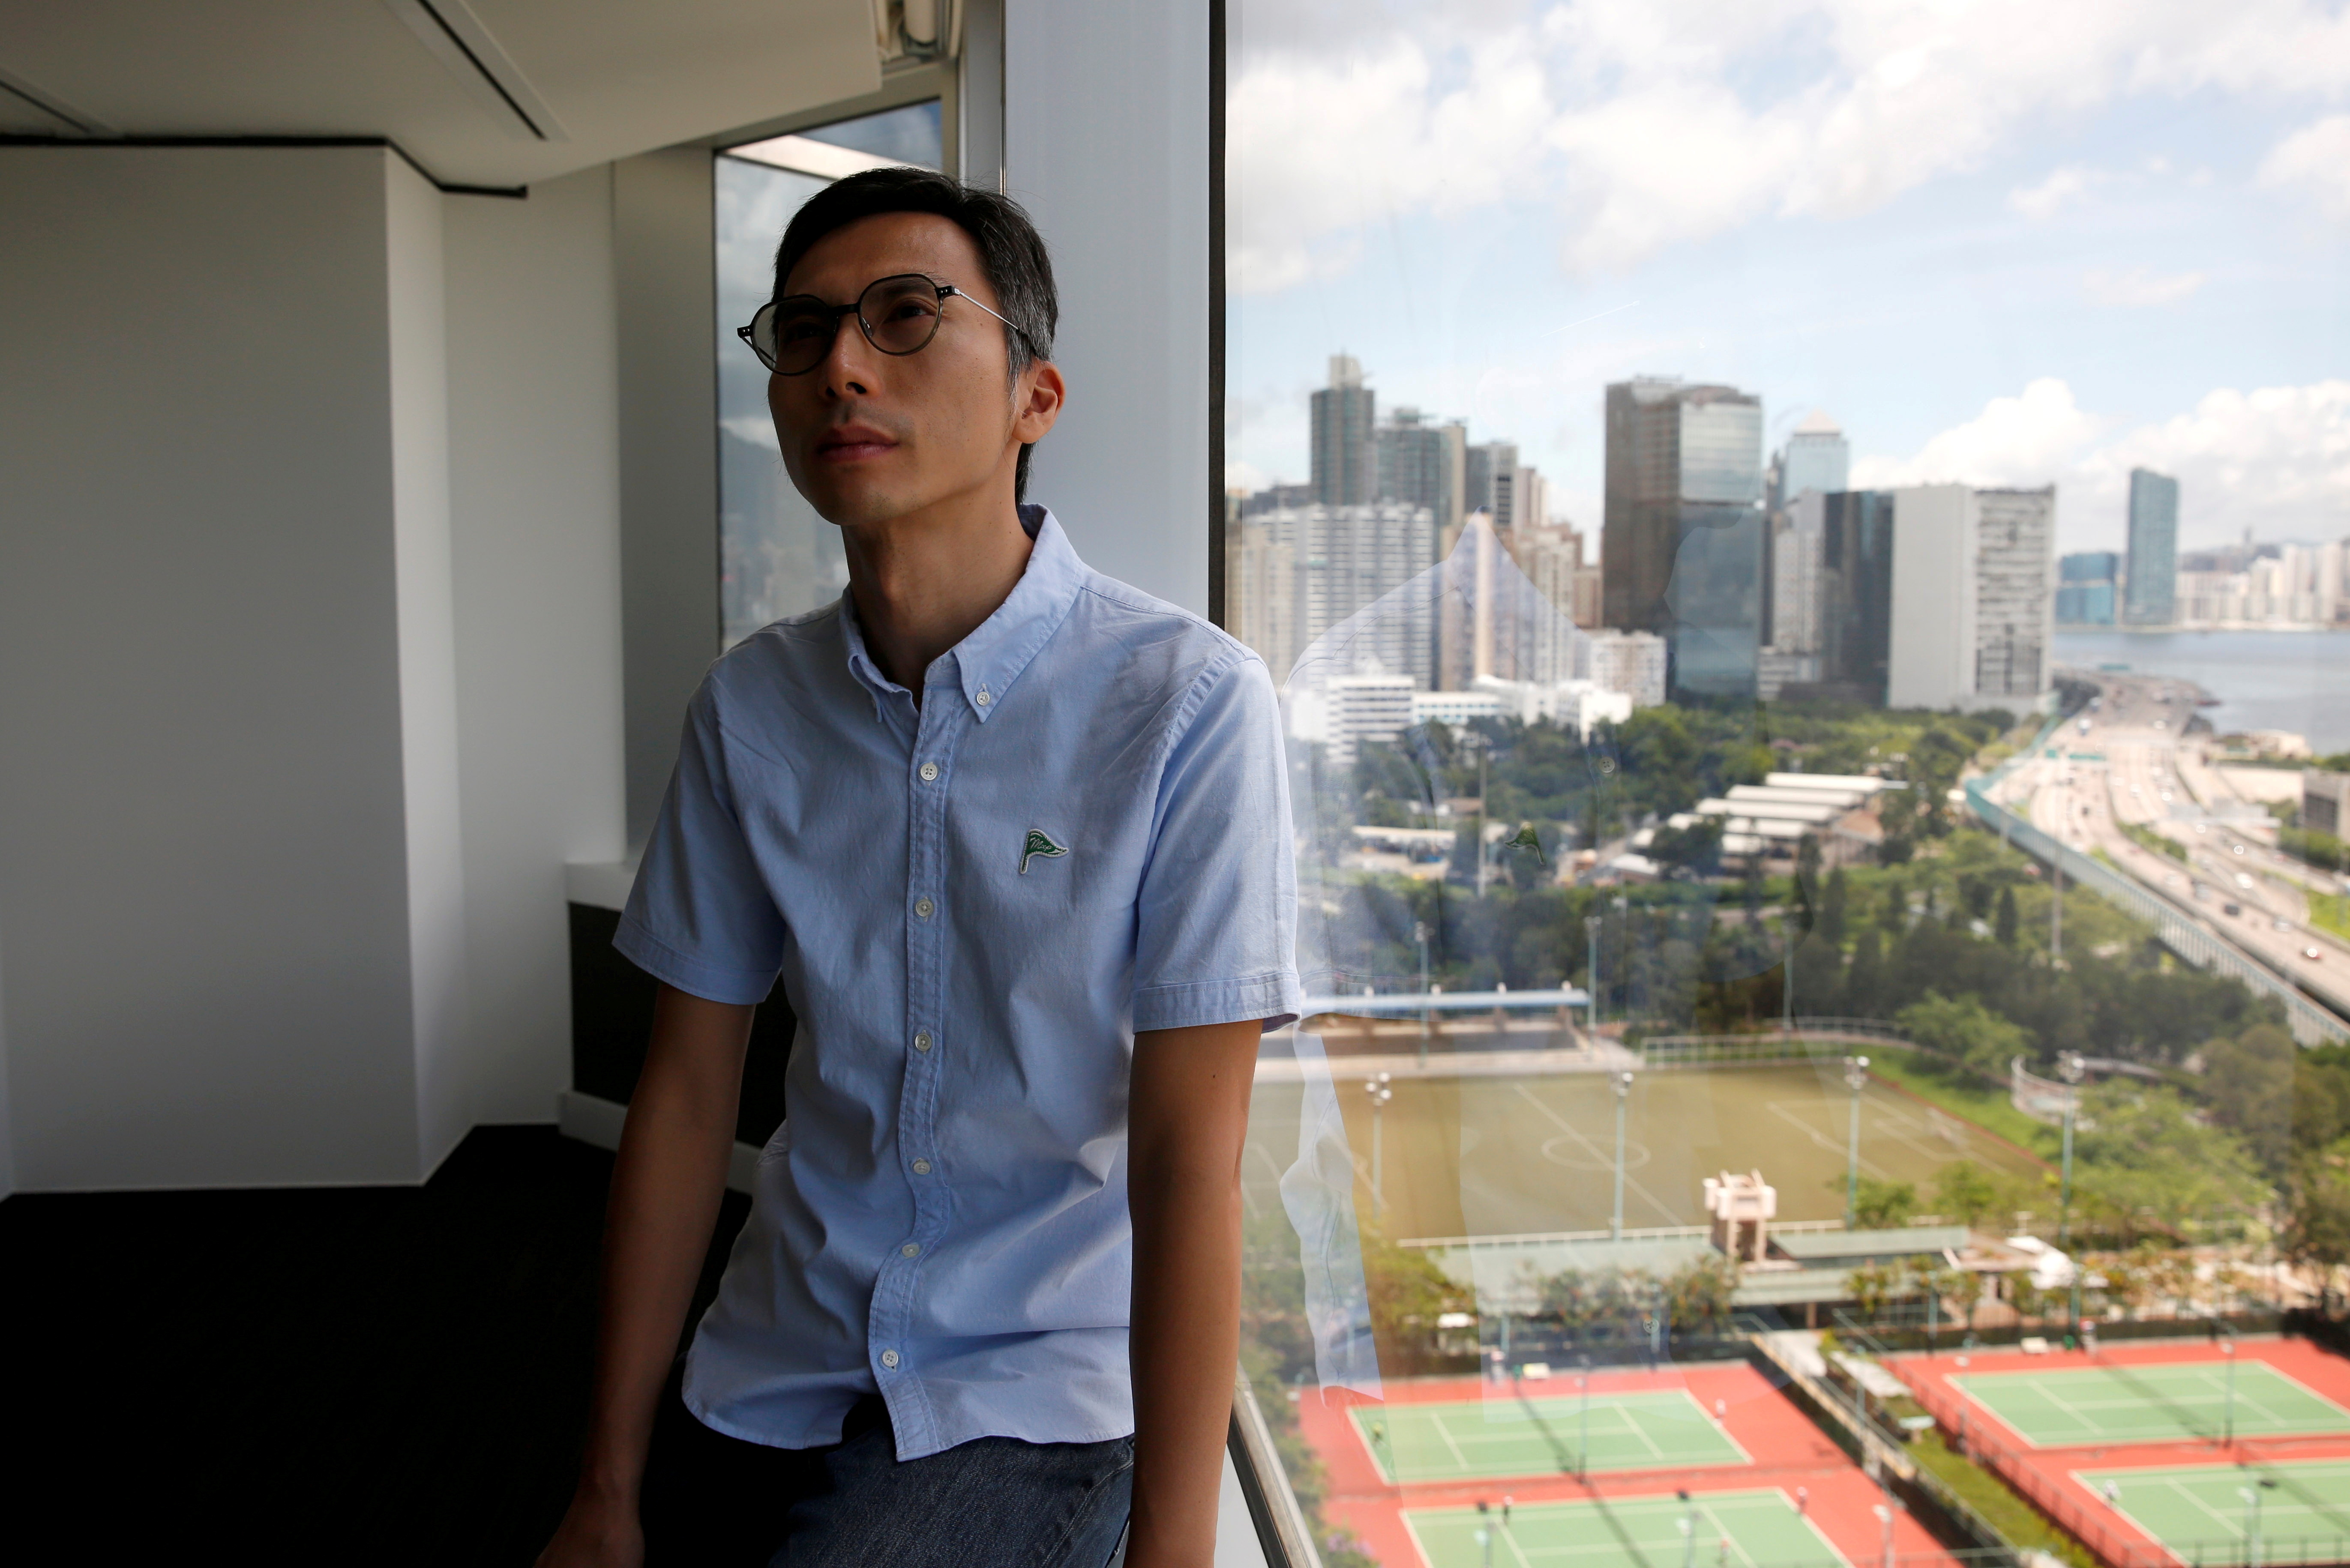 Hong Kong film director Kiwi Chow poses after an interview with Reuters, in Hong Kong, China June 19, 2020. Picture taken June 19, 2020. REUTERS/Tyrone Siu/File Photo